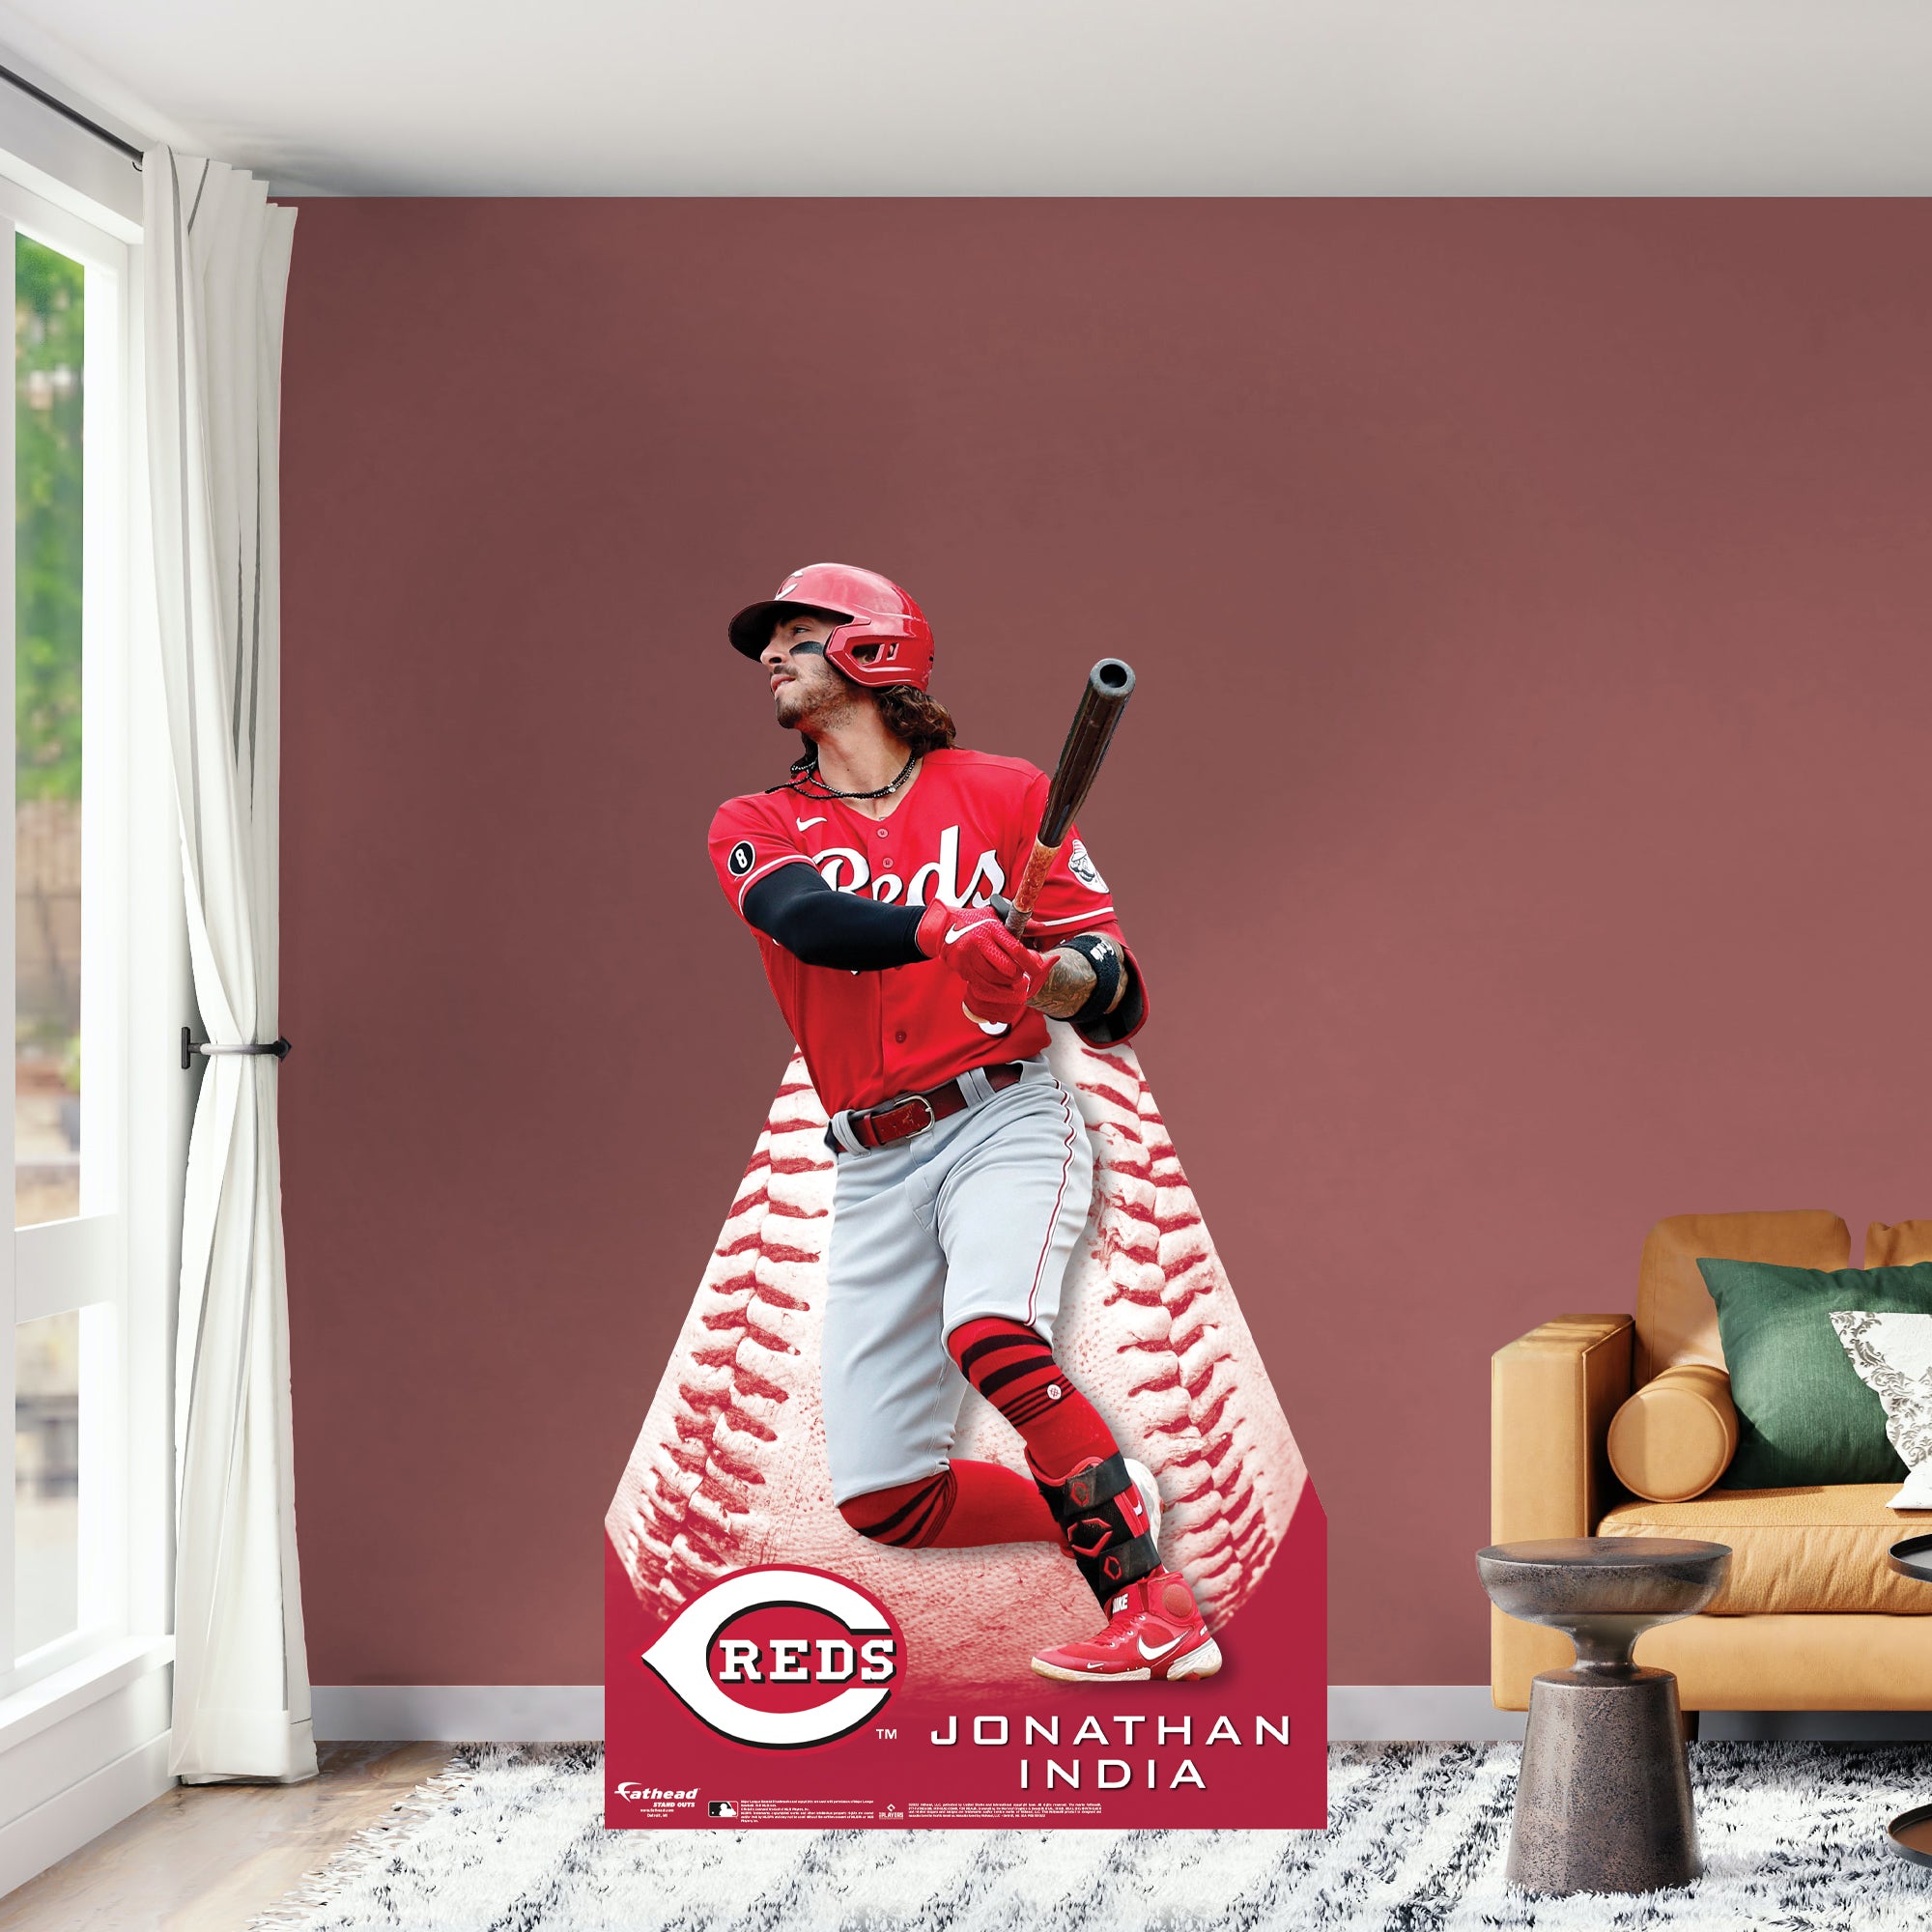 Cincinnati Reds: Jonathan India 2022 Poster - Officially Licensed MLB